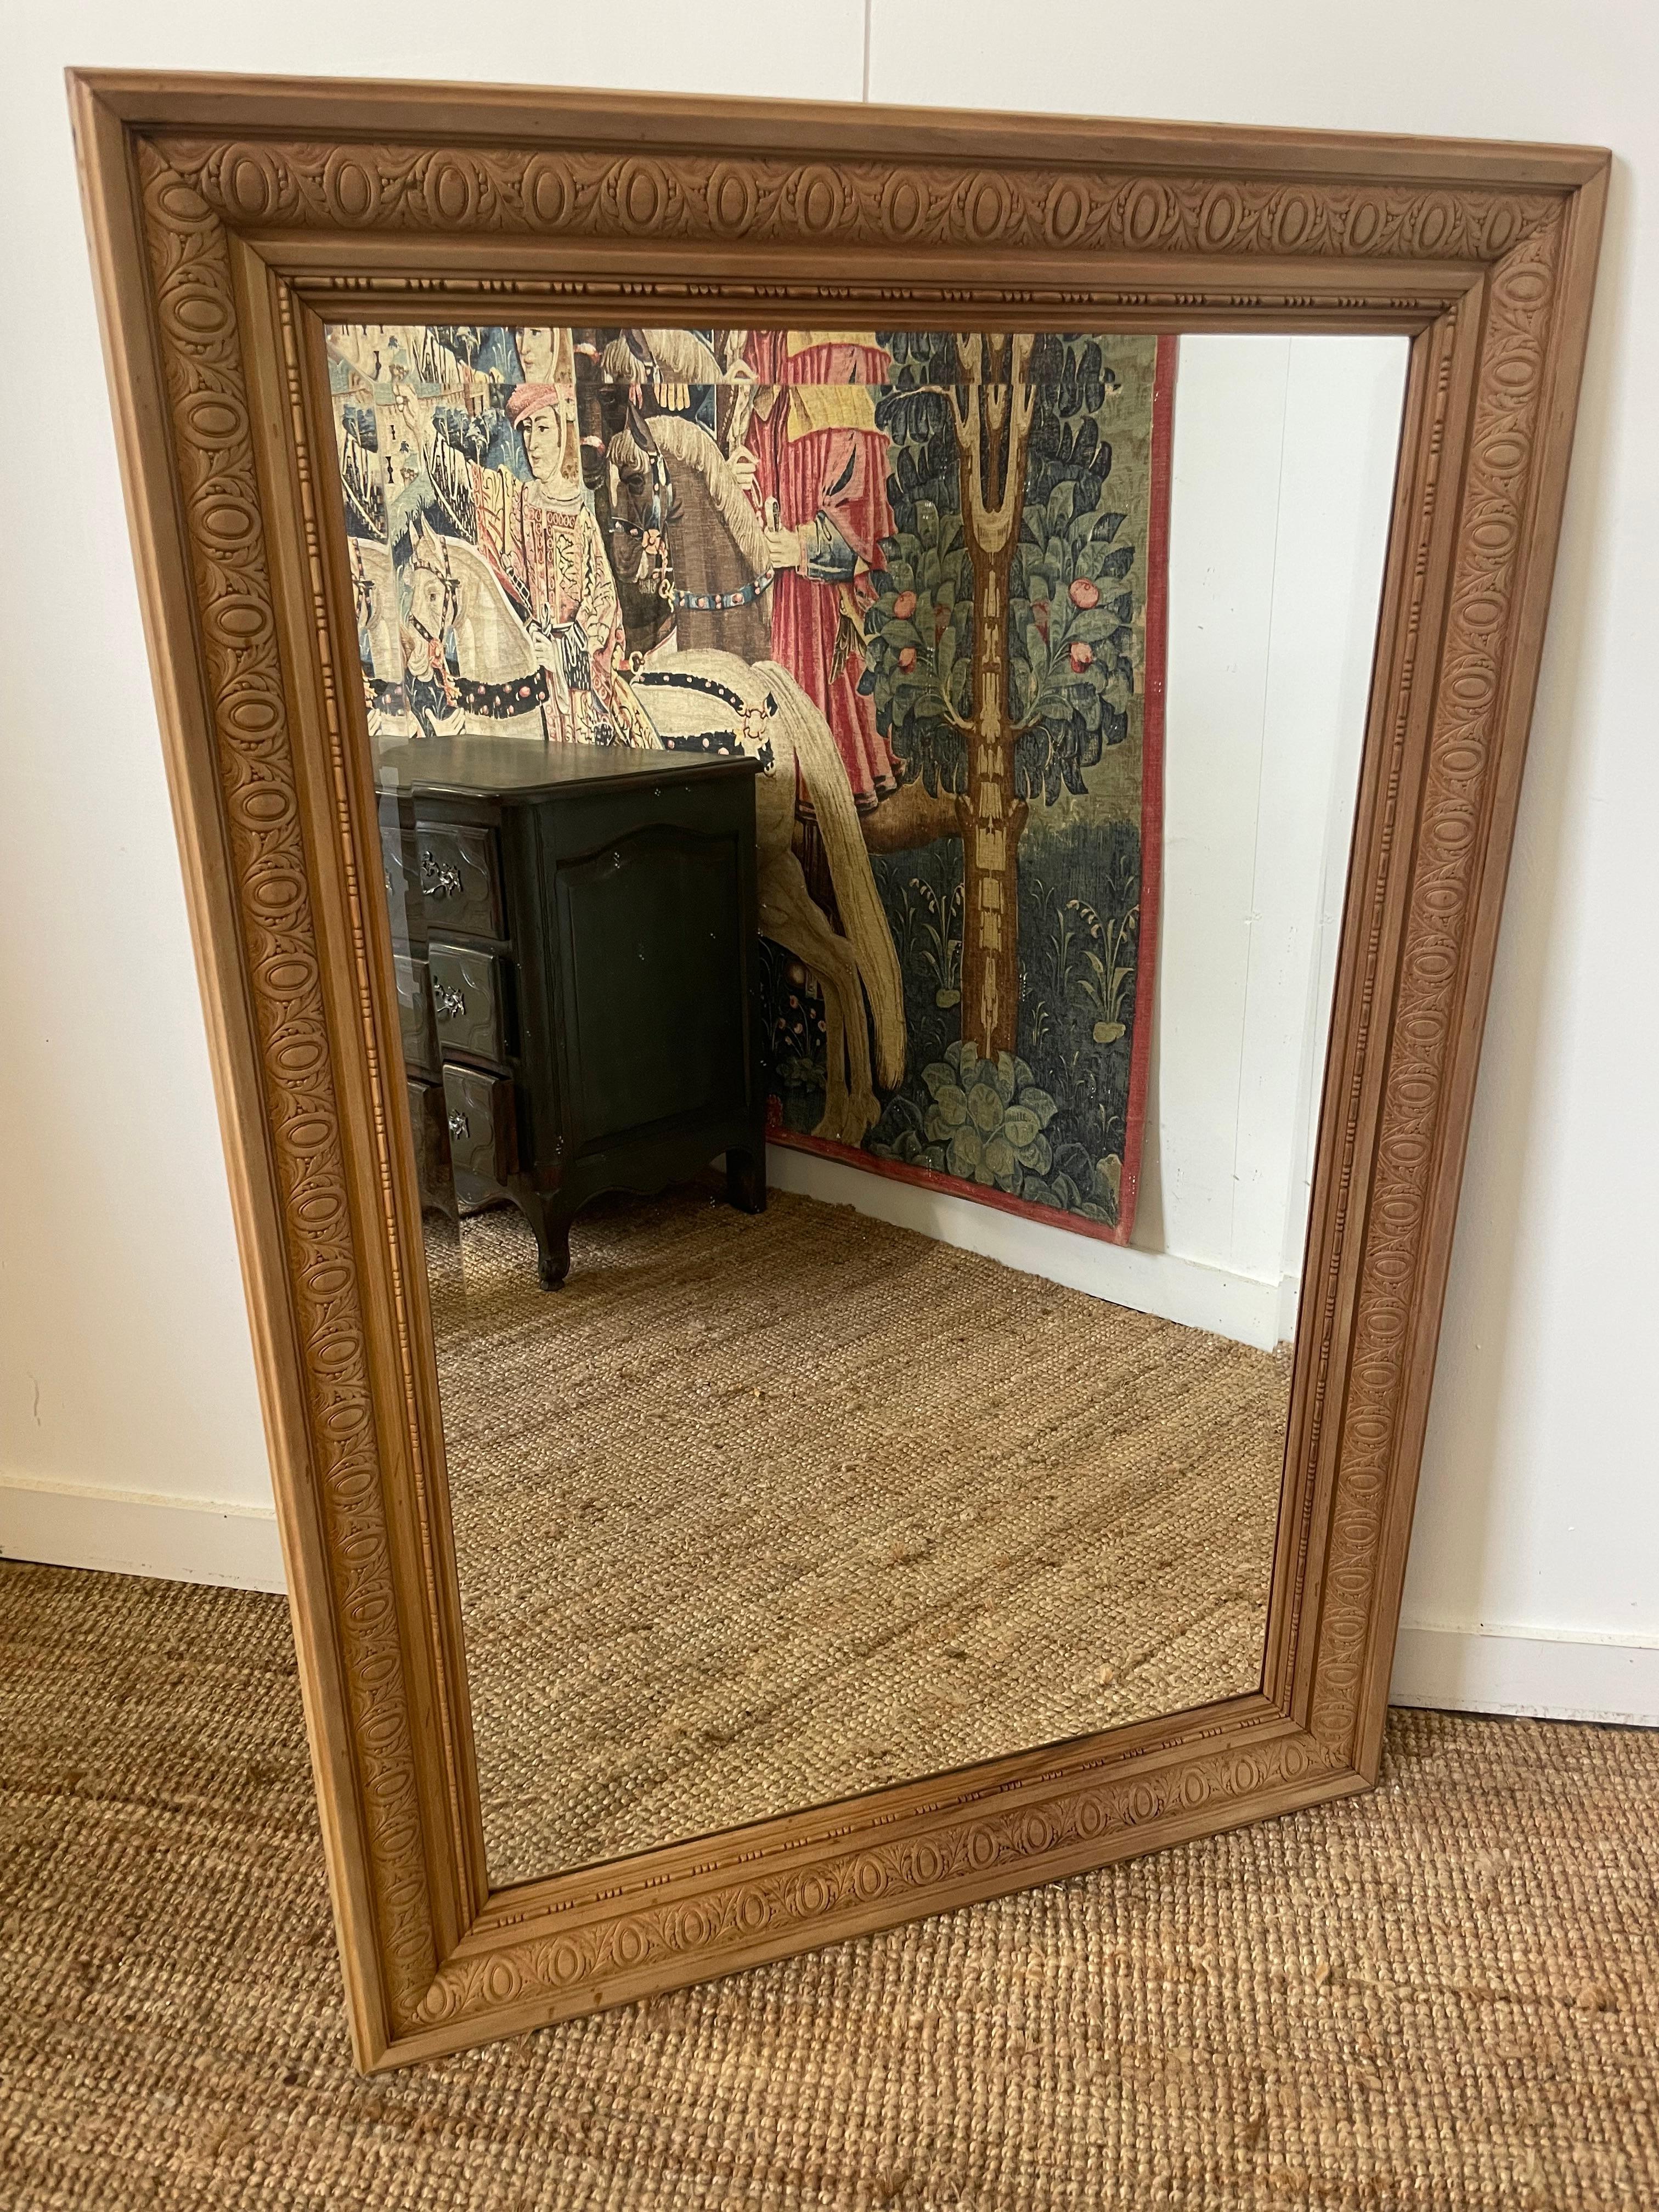 Good early 20th century scrubbed walnut mirror
French circa 1920’s with original bevelled mirror and backboards
137cms x 94cms could hang landscape or portrait